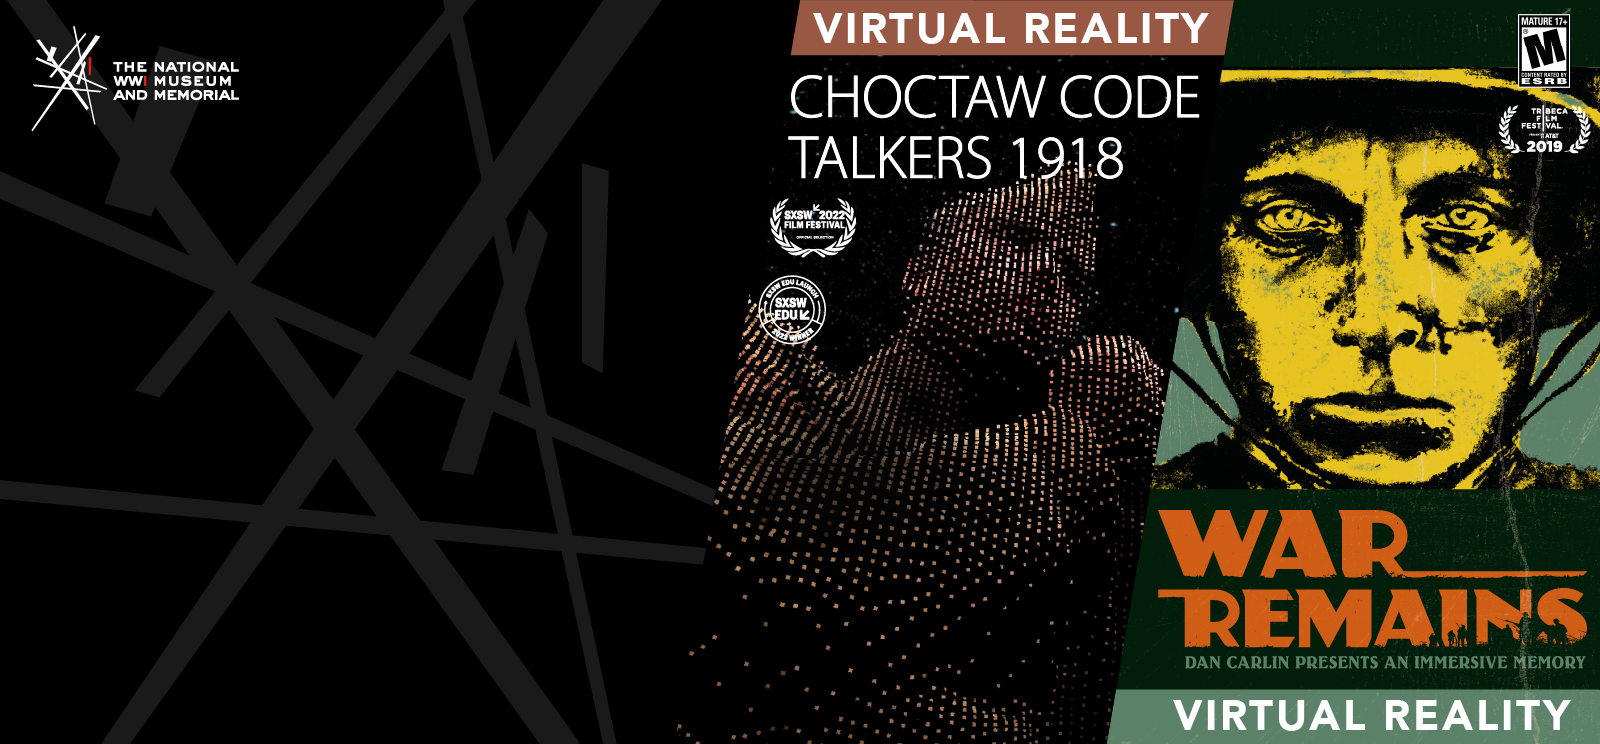 Left image: 3D rendering of a Native American man in WWI uniform broken up into pixel-like graphics. Text: 'Choctaw Code Talkers 1918 / Virtual Reality' Right image: A flat poster cartoon illustration of a man's craggy face staring at the viewer wearing a helmet. Text: 'War Remains / Virtual Reality'